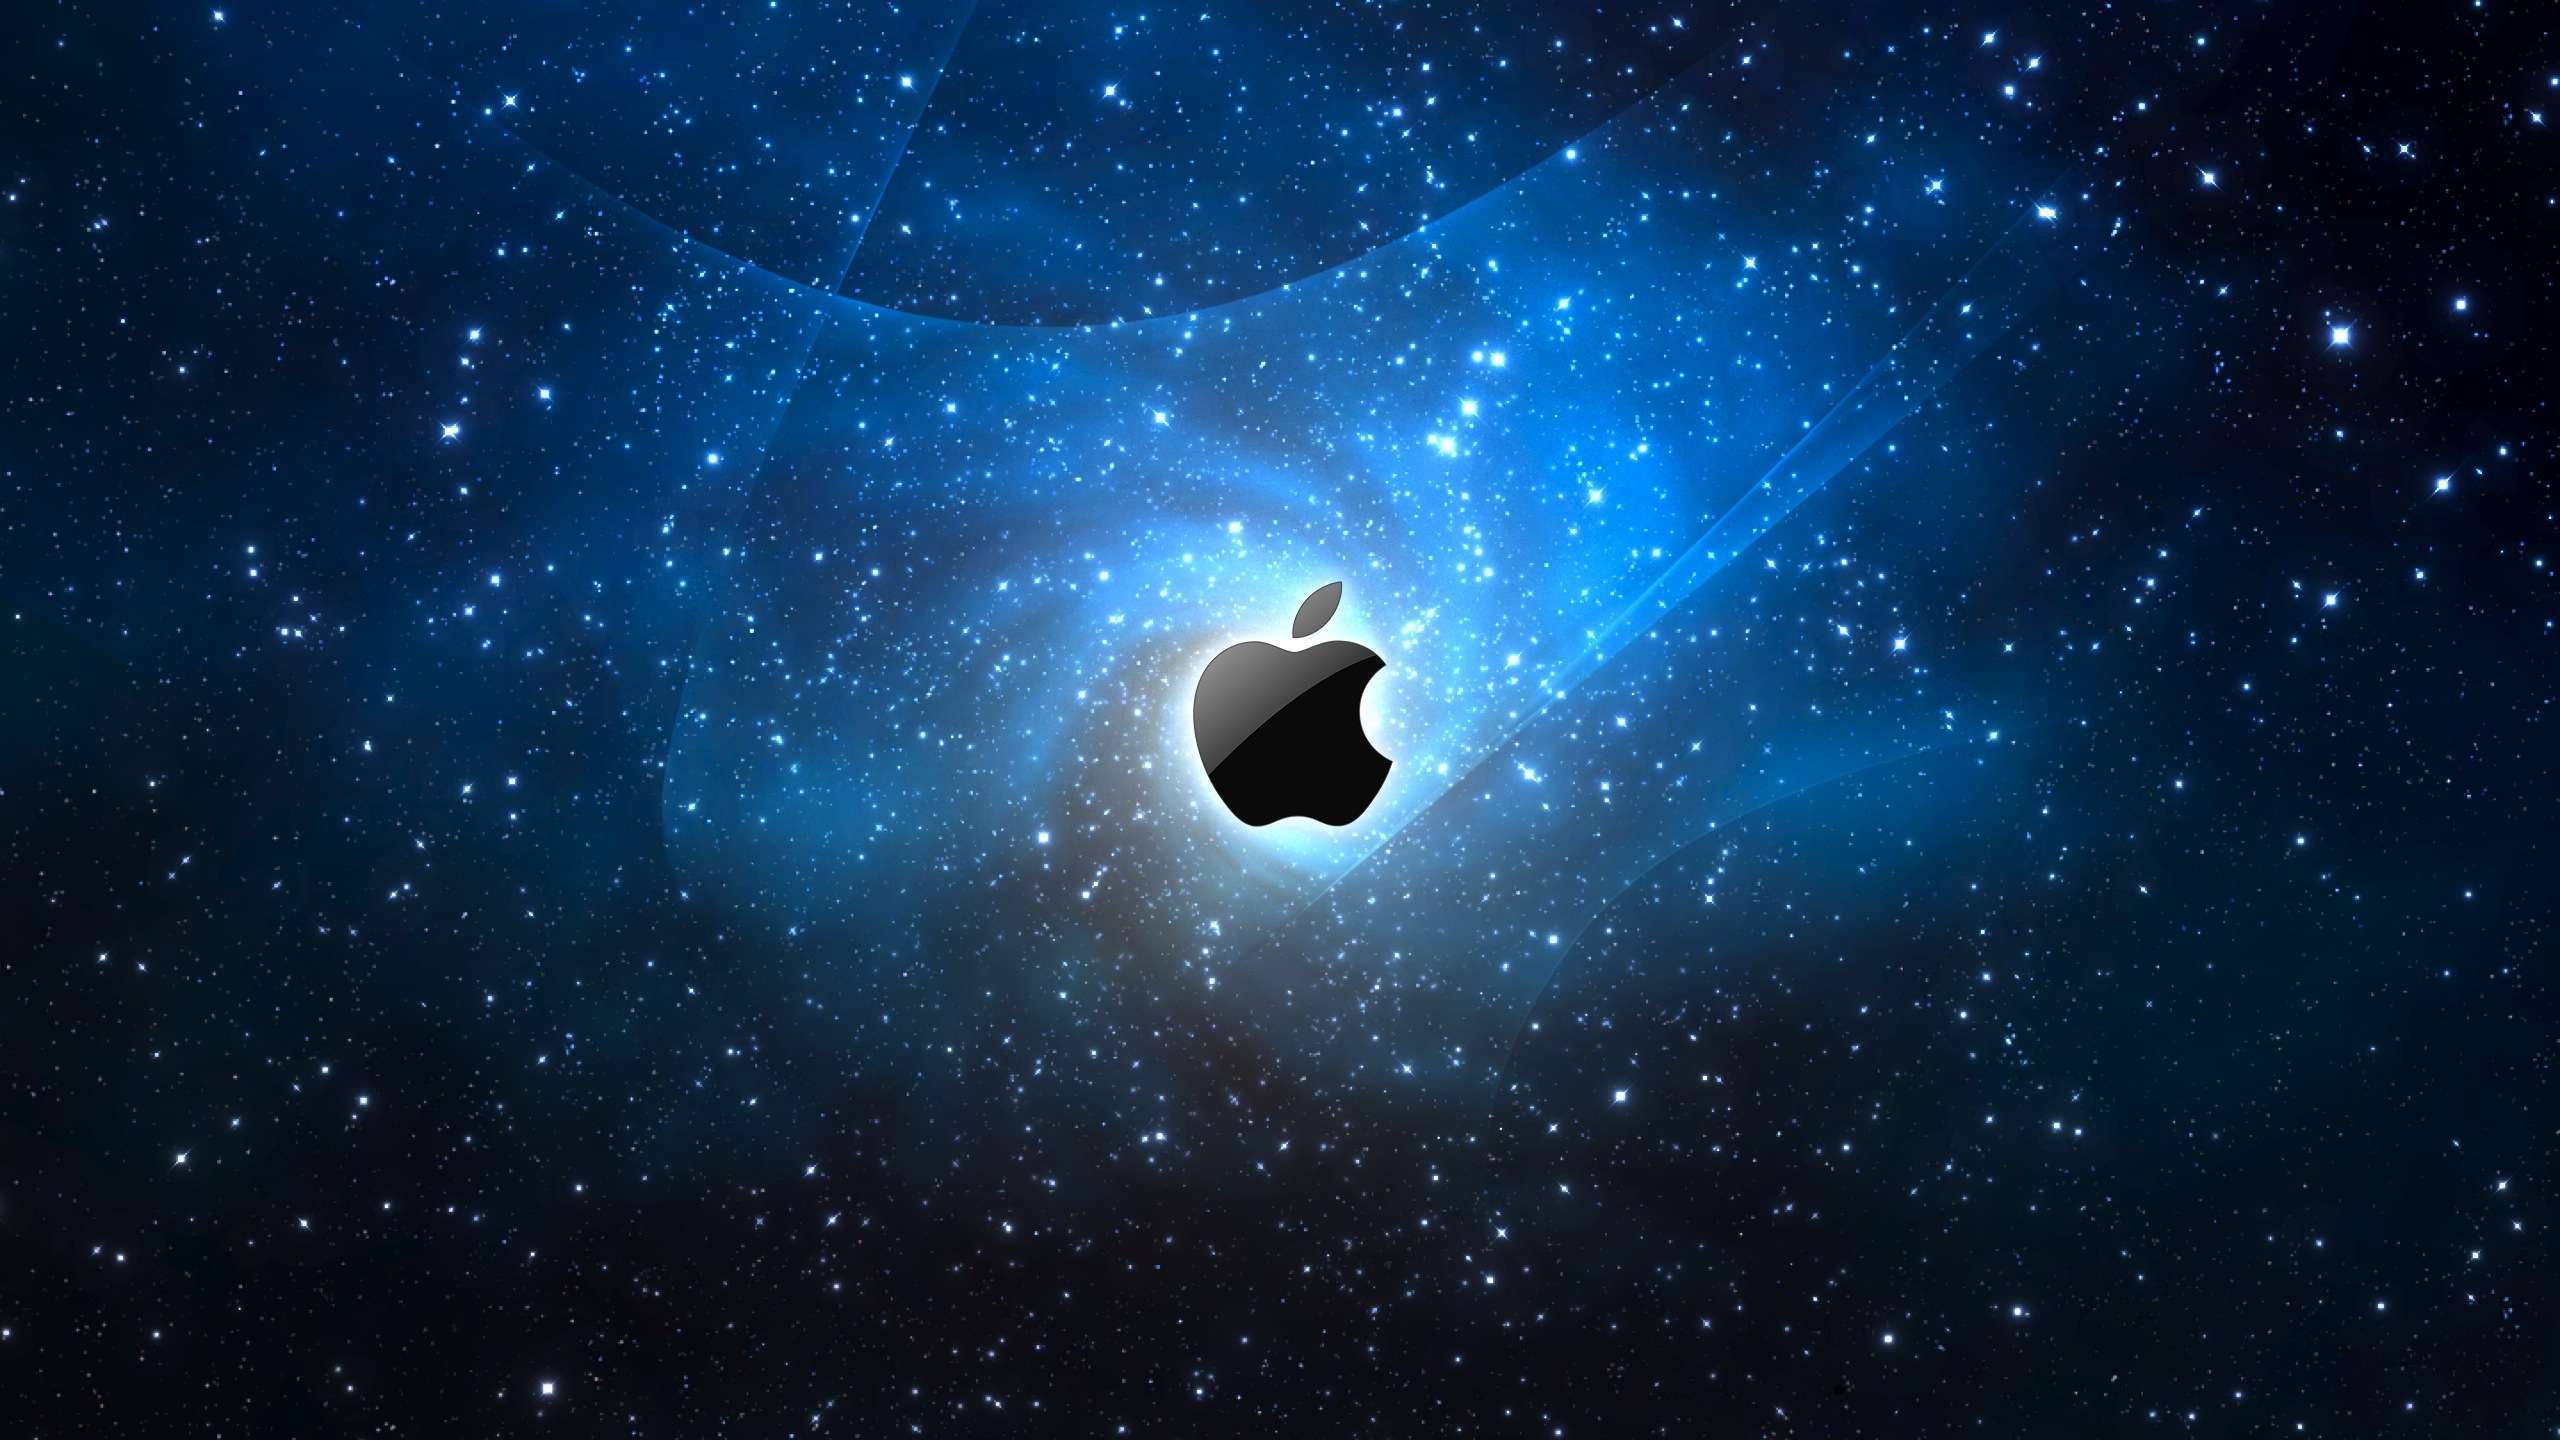 Apple Galaxy wallpaper for your iMac. High Quality PC Dekstop